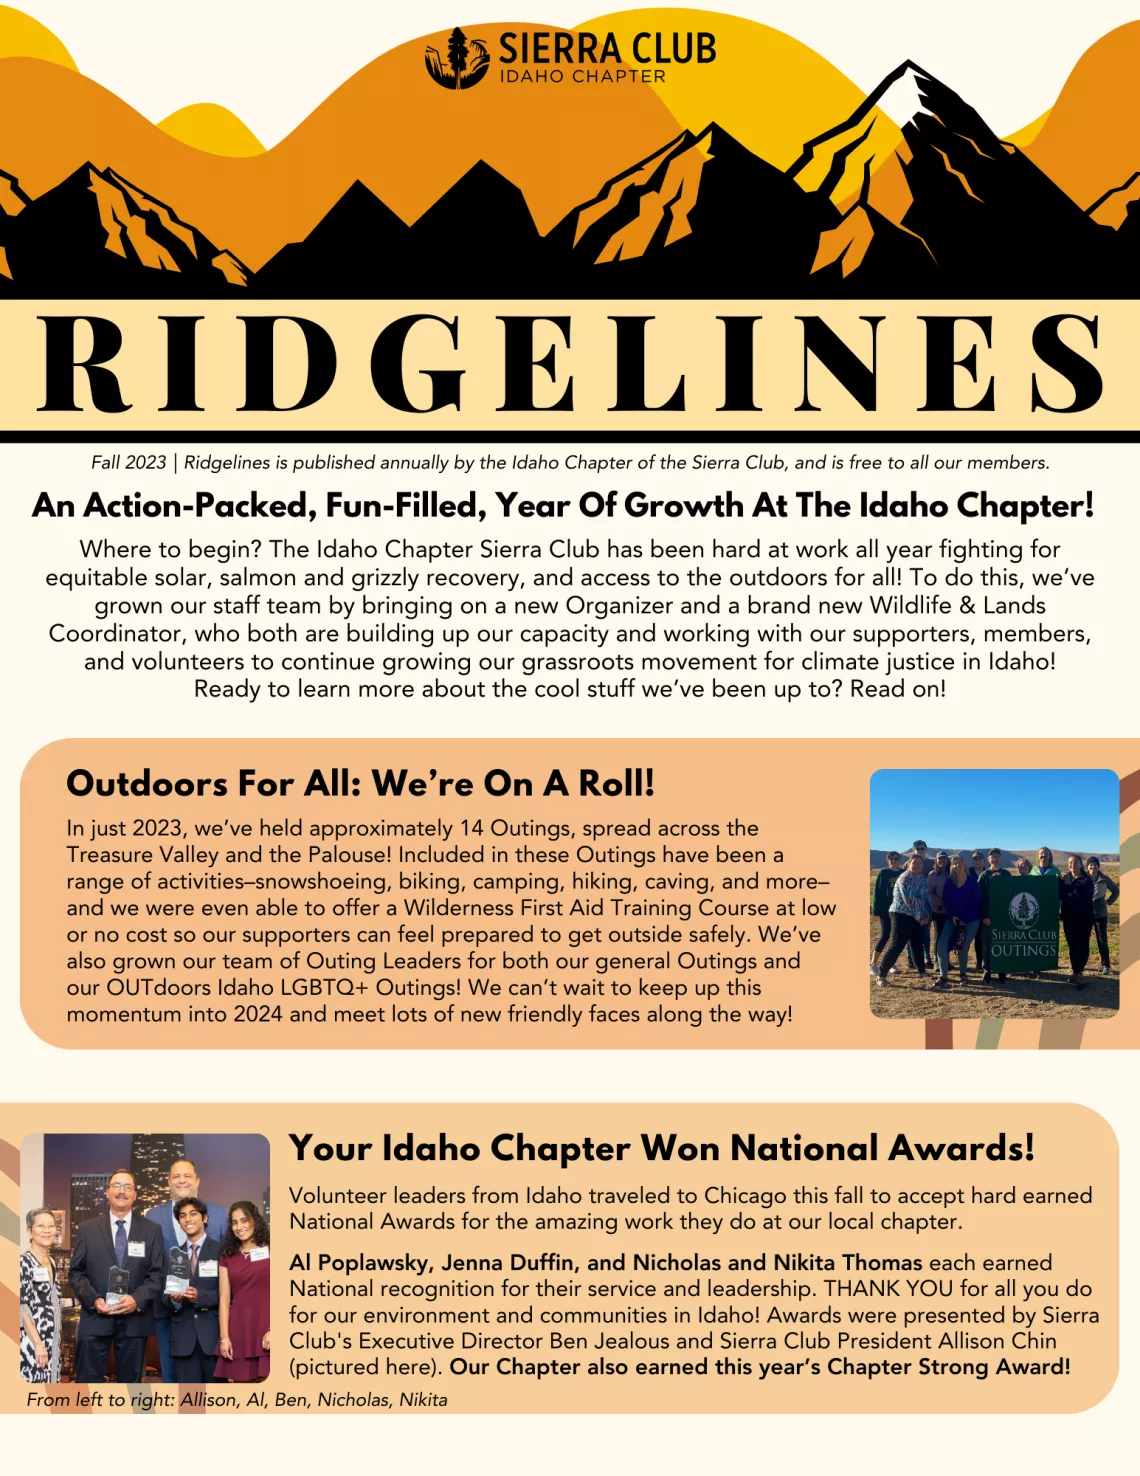 Front page of Newsletter, titled RIDGELINES with mountainscape on top with orange backdrop